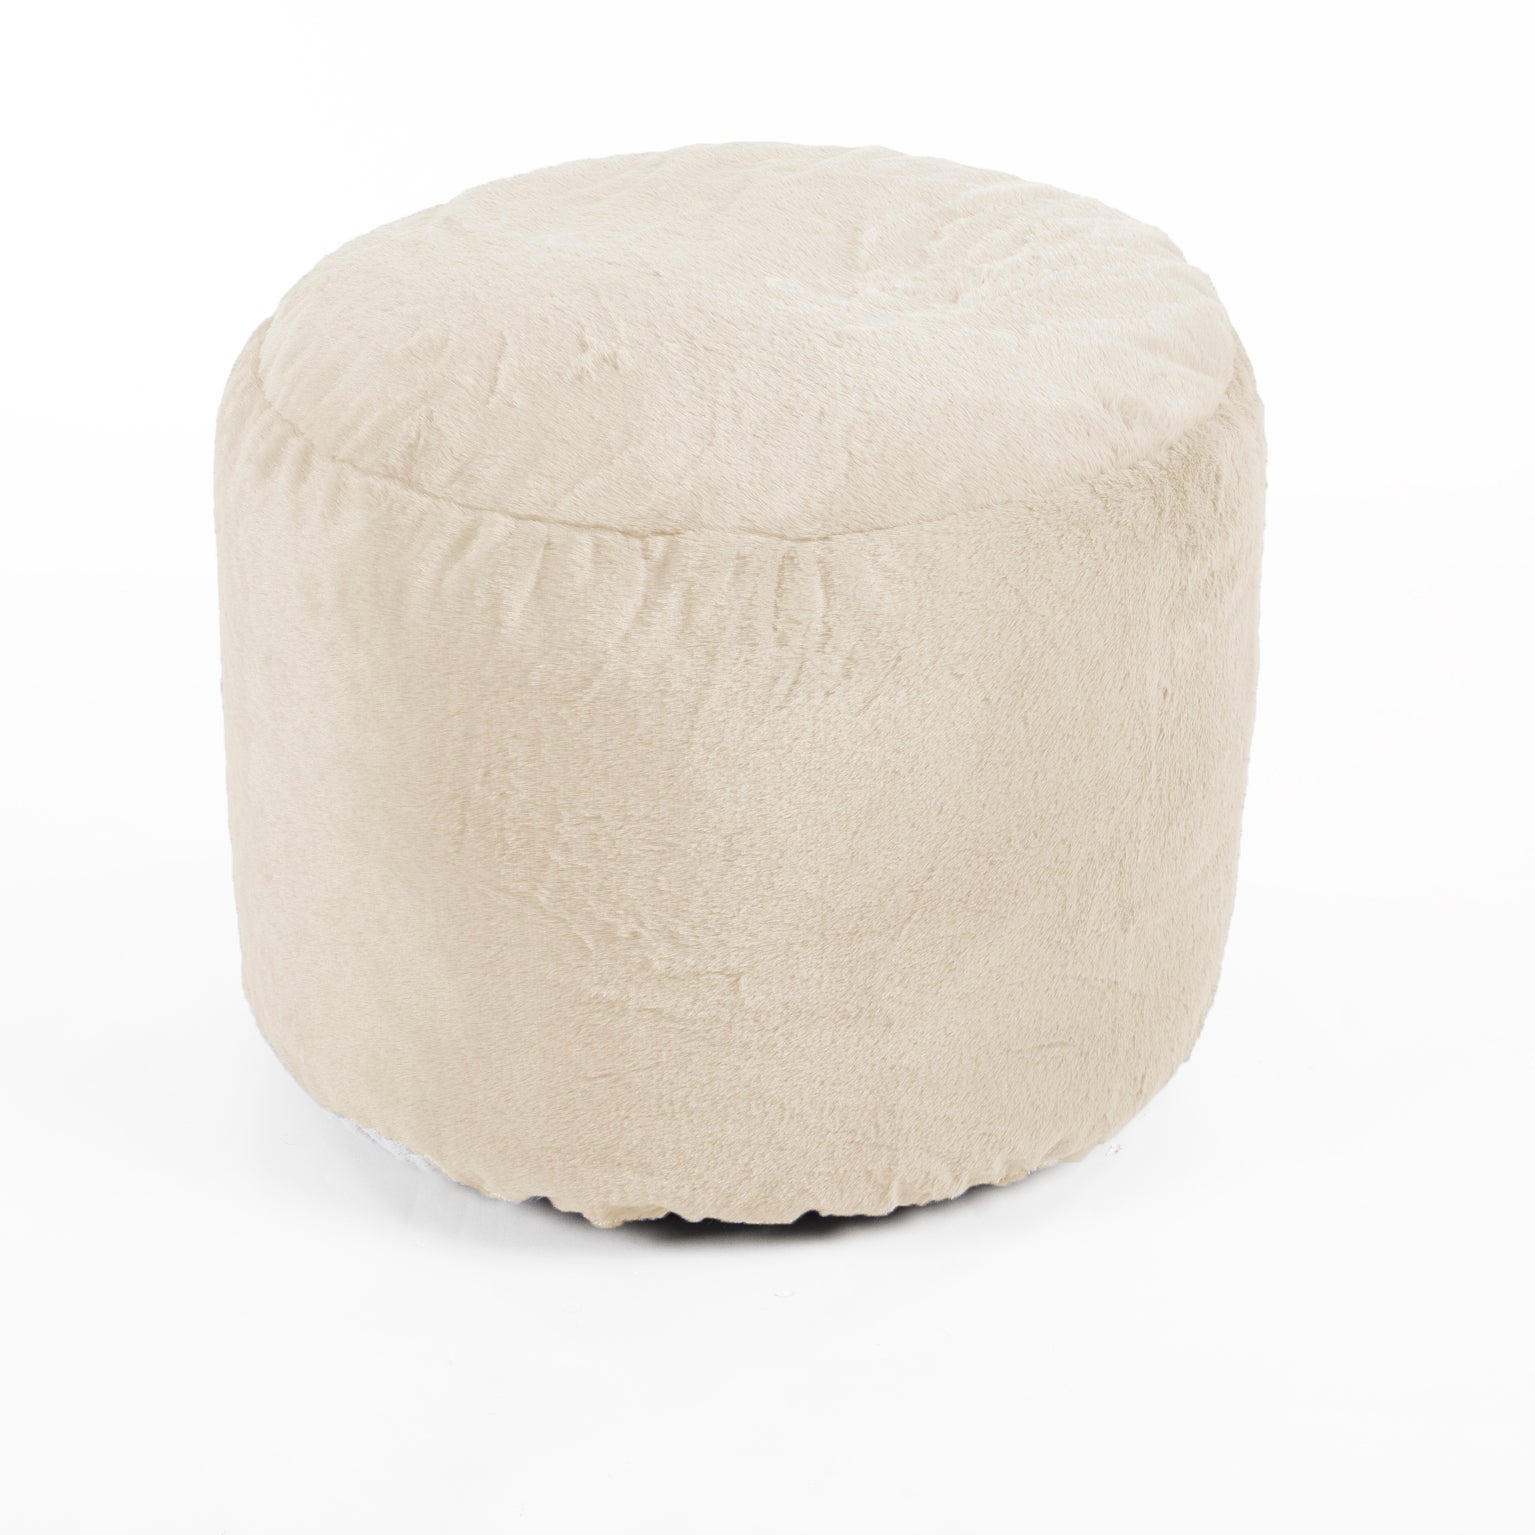 Pouf Poire Relax Similicuir Indoor Blanc Happers